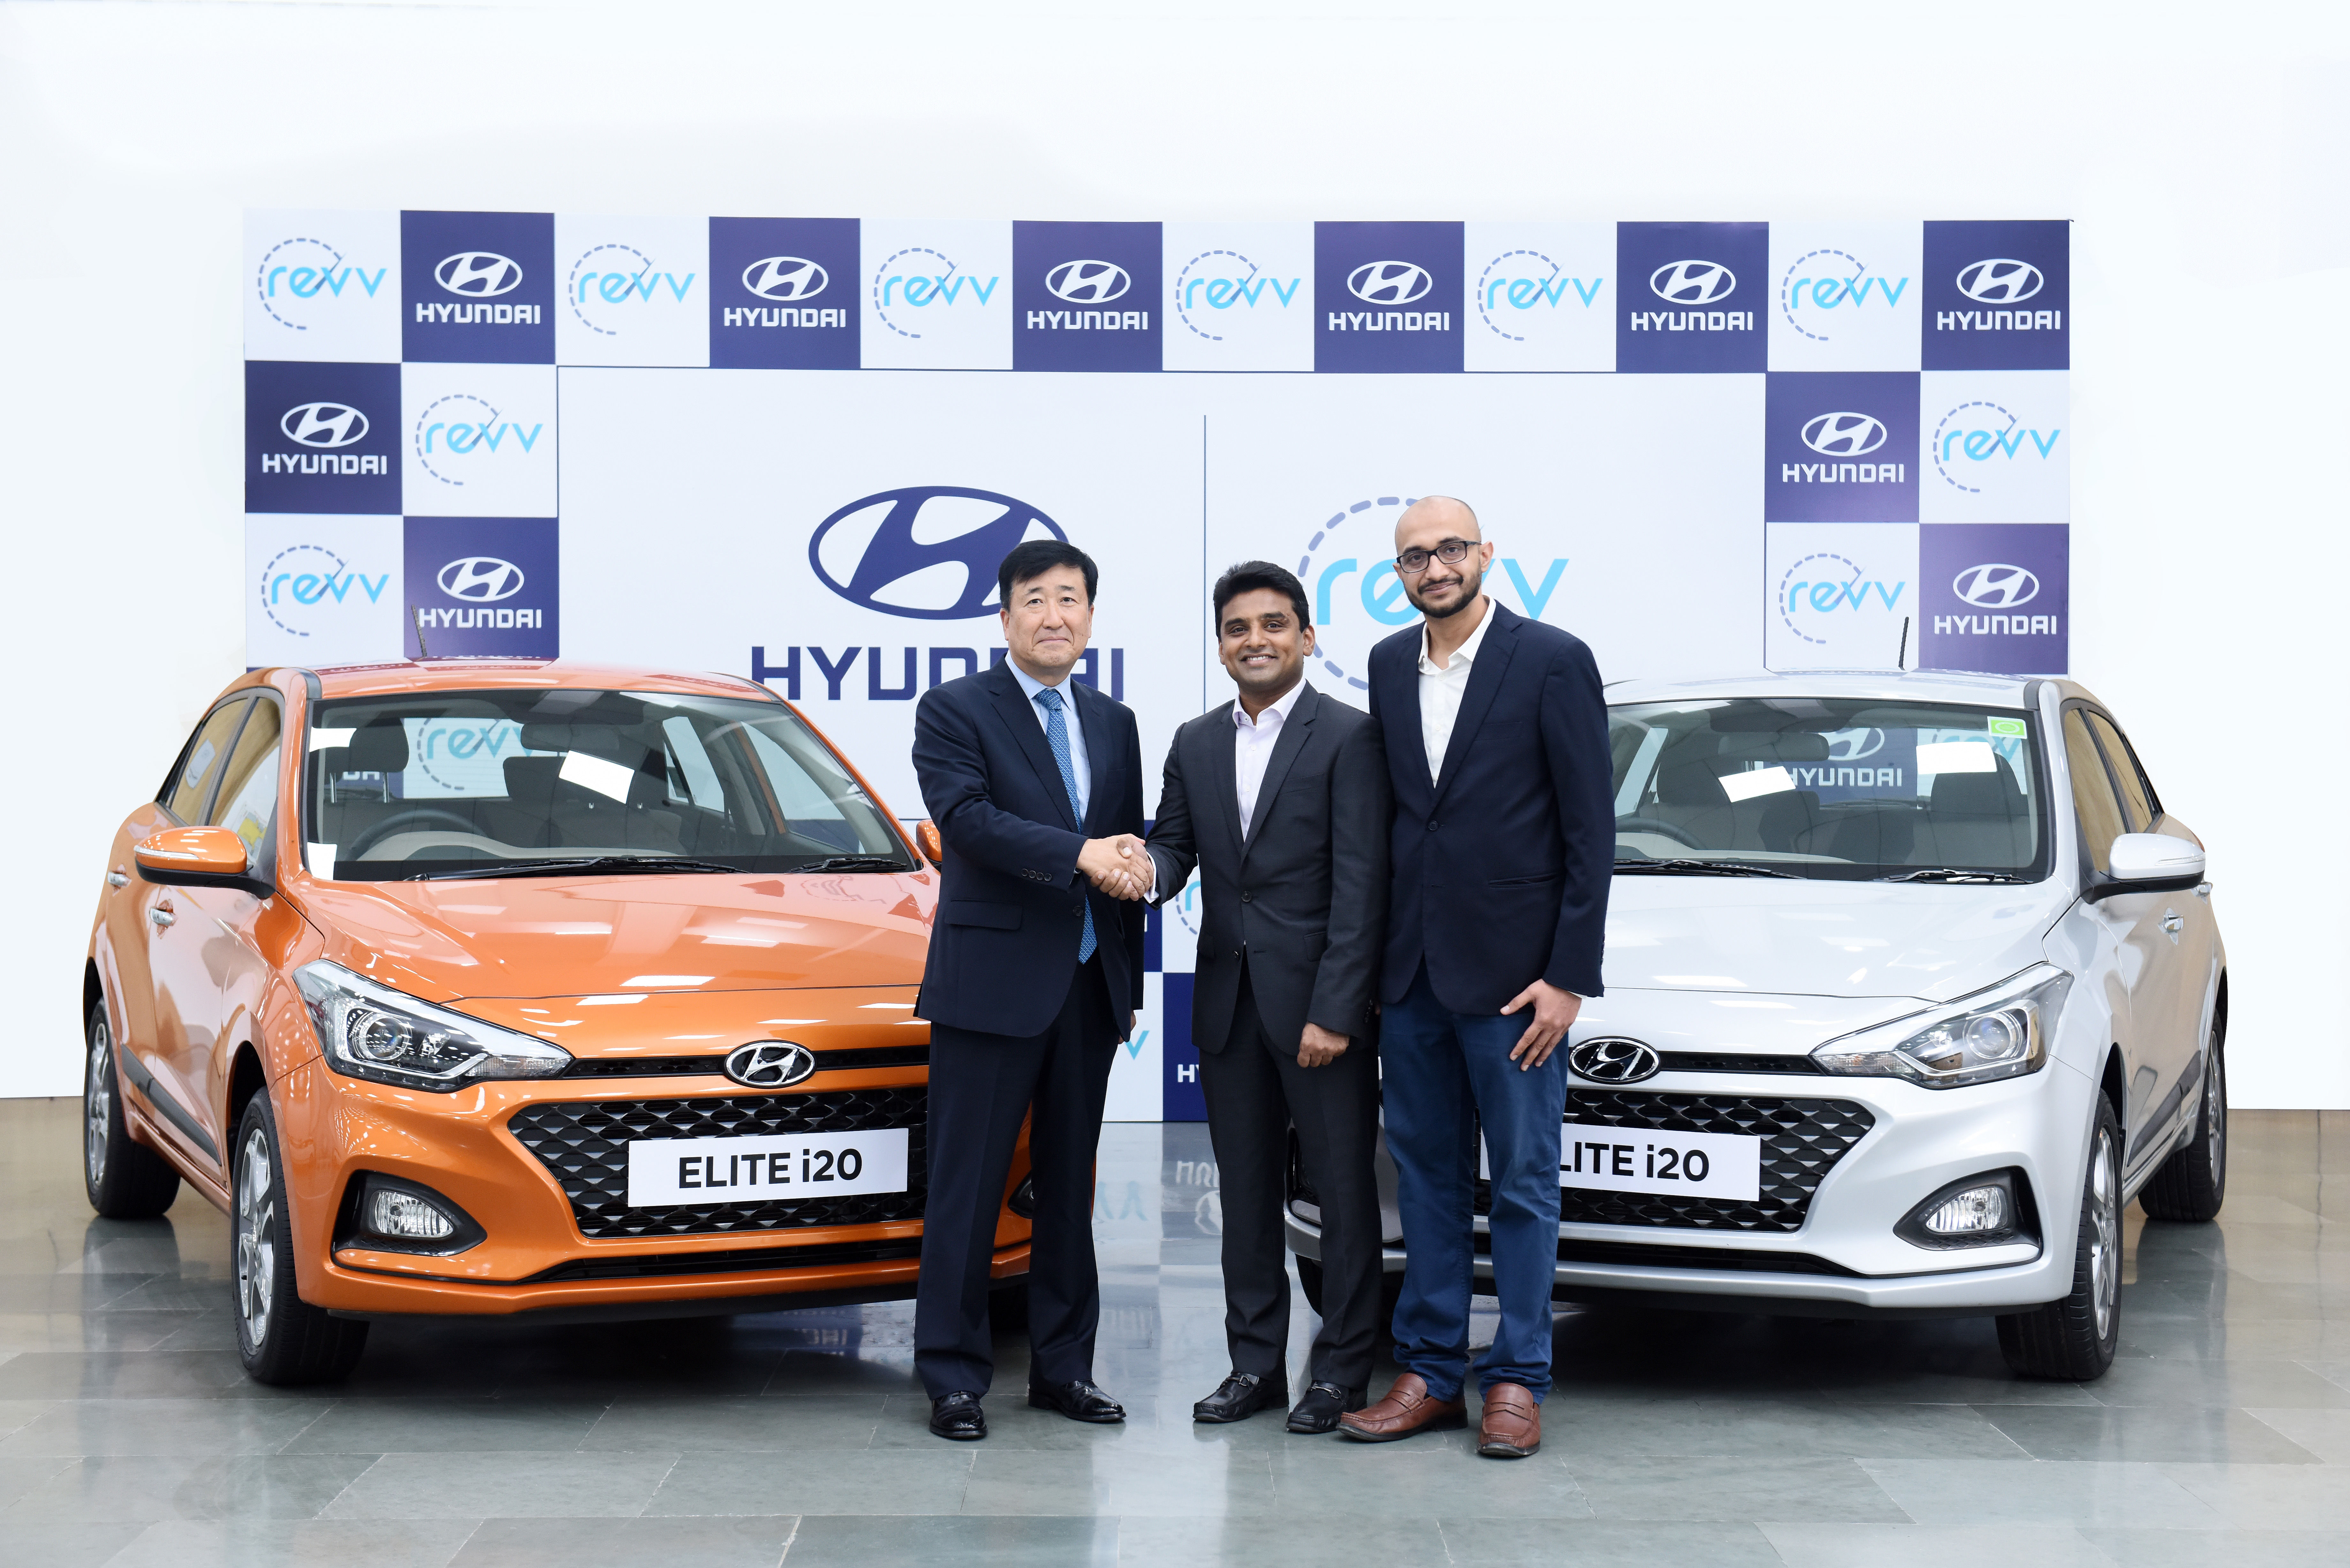 Hyundai Motor Expands Mobility Service in India through Strategic Investment into Revv